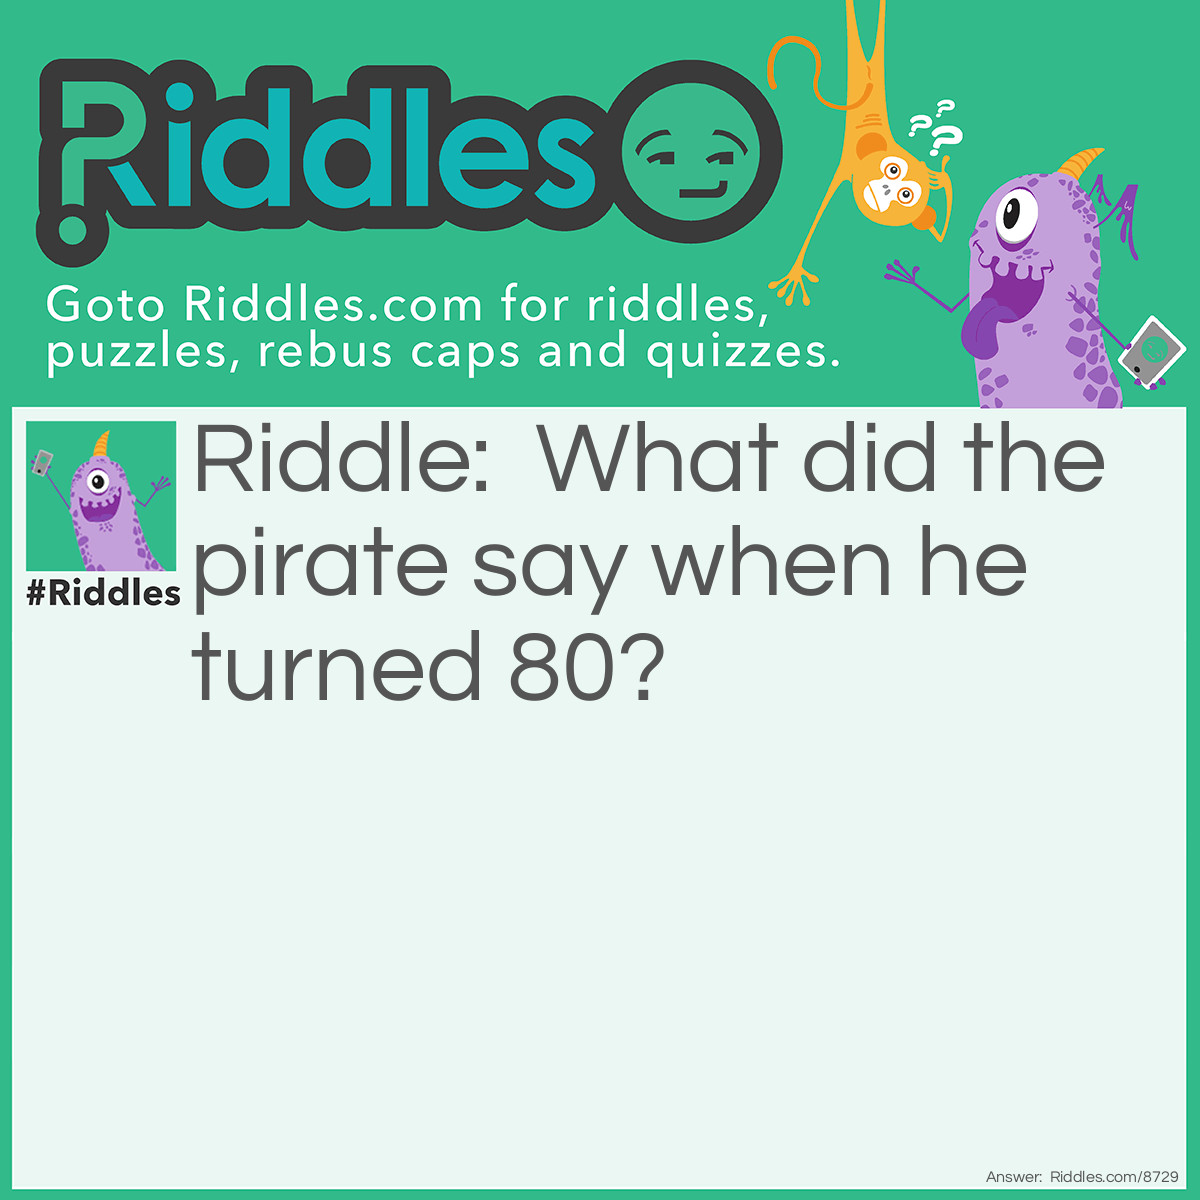 Riddle: What did the pirate say when he turned 80? Answer: Aye Matey!